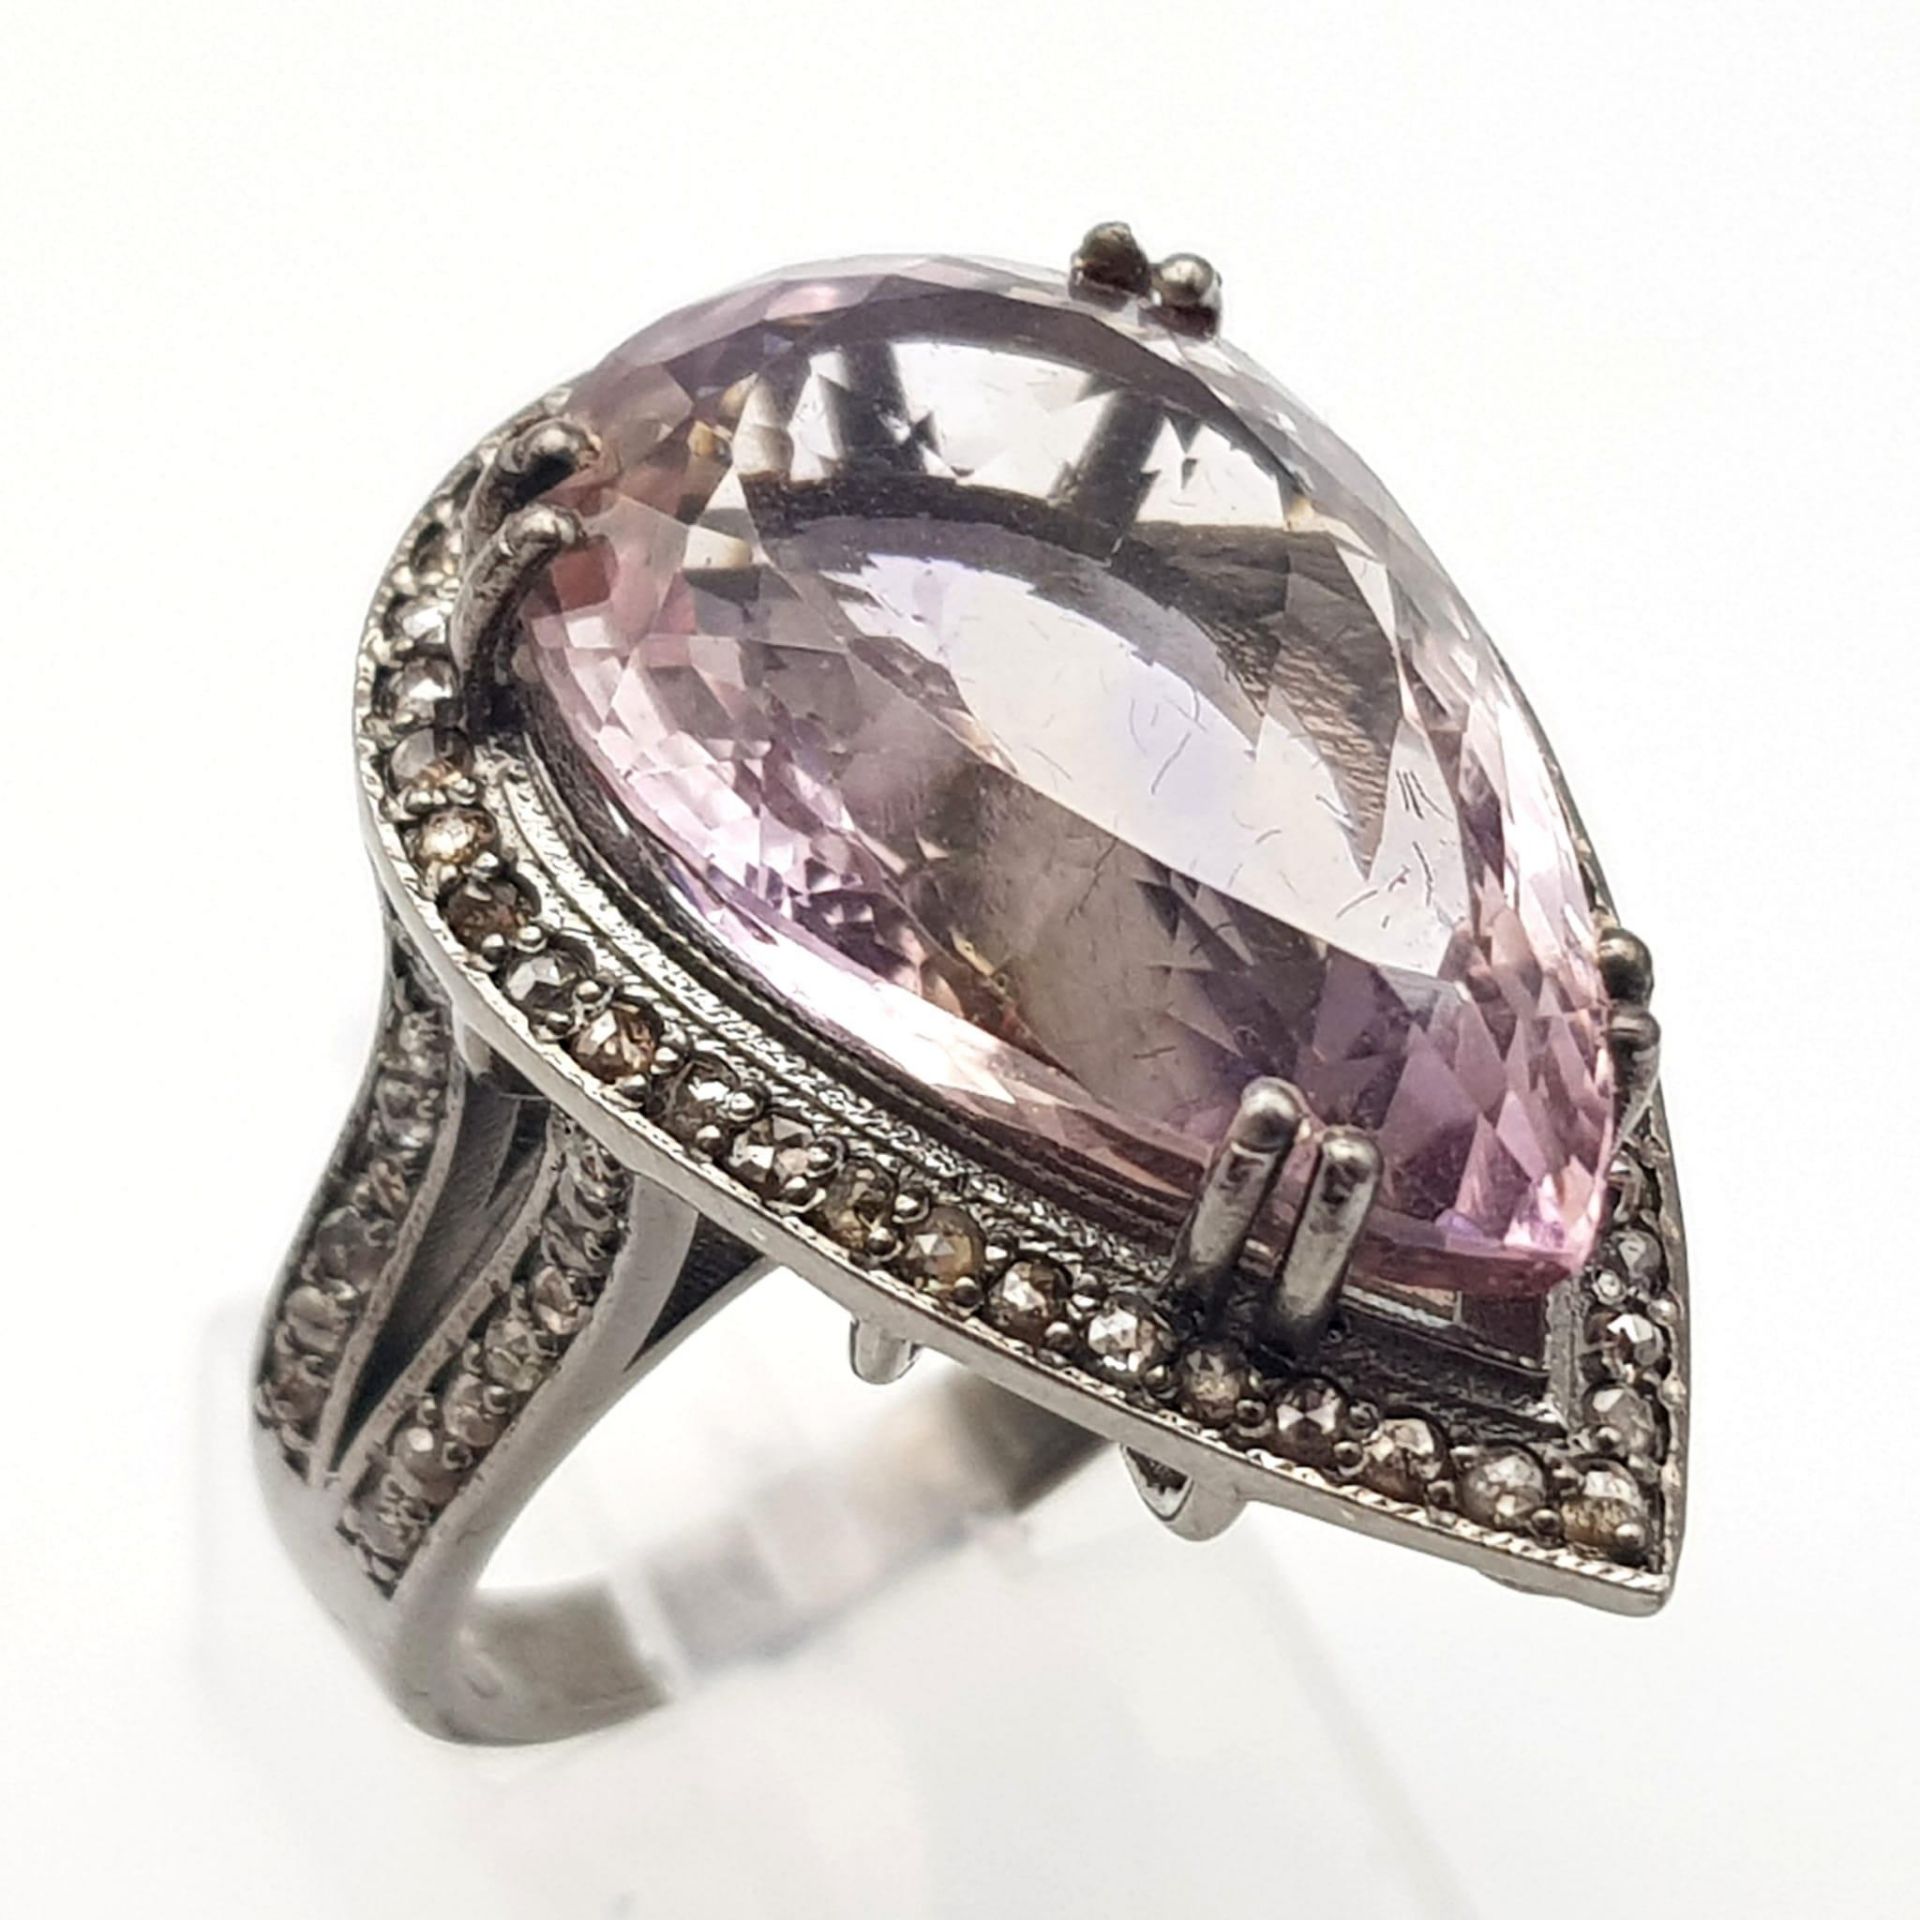 A 15ct Amethyst Gemstone Ring with 0.90ctw of Diamonds set in 925 Silver. A beautiful pear shaped